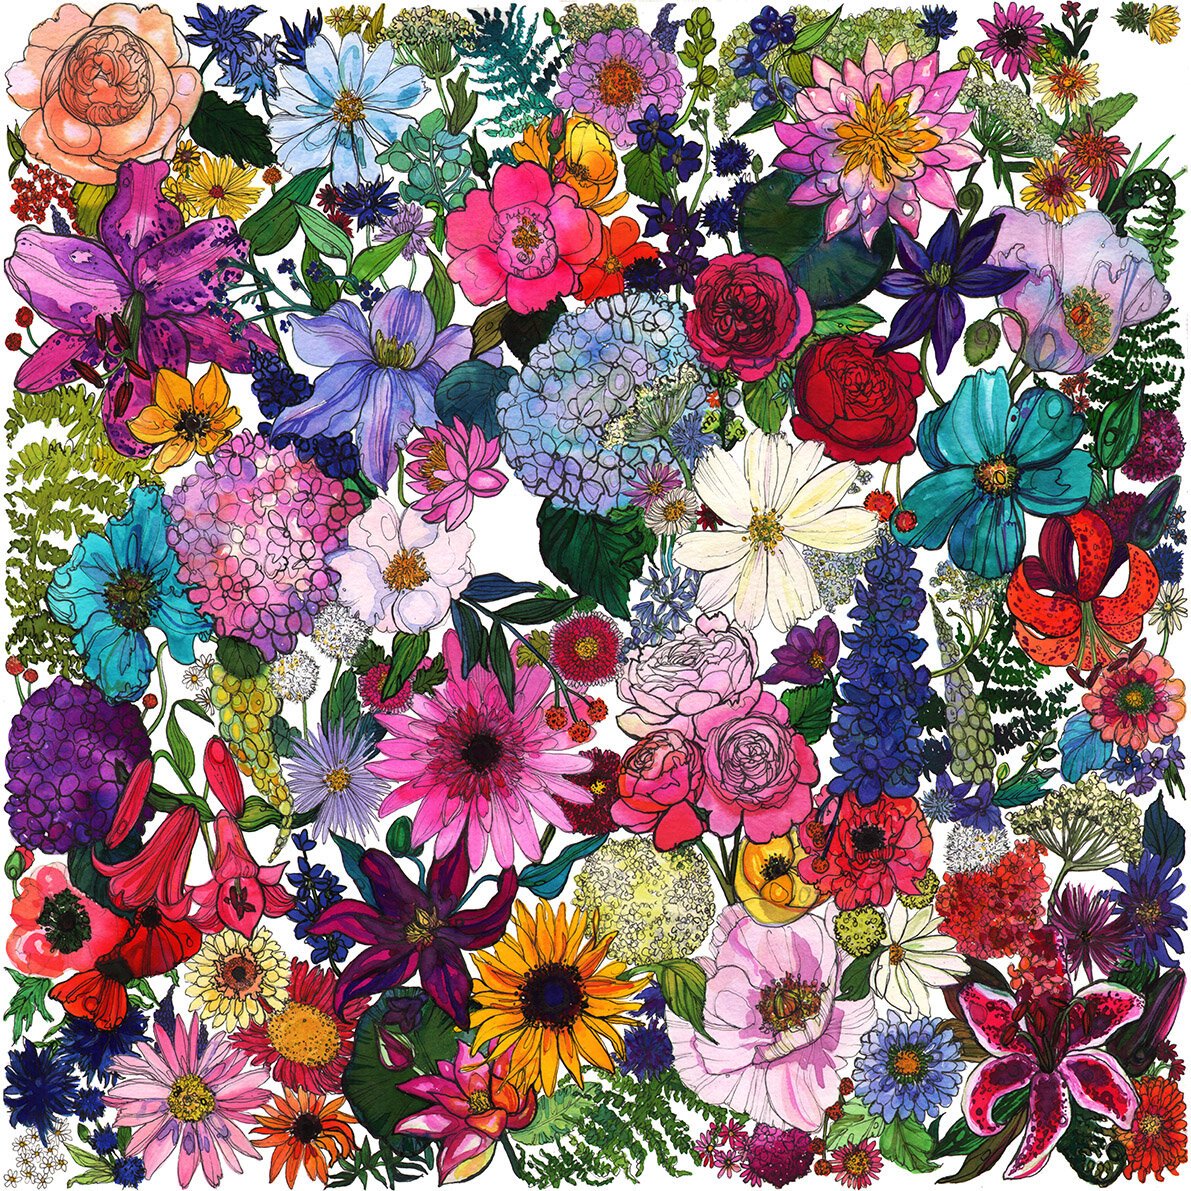 Summer Floral Watercolour Illustration by Marcella Wylie 